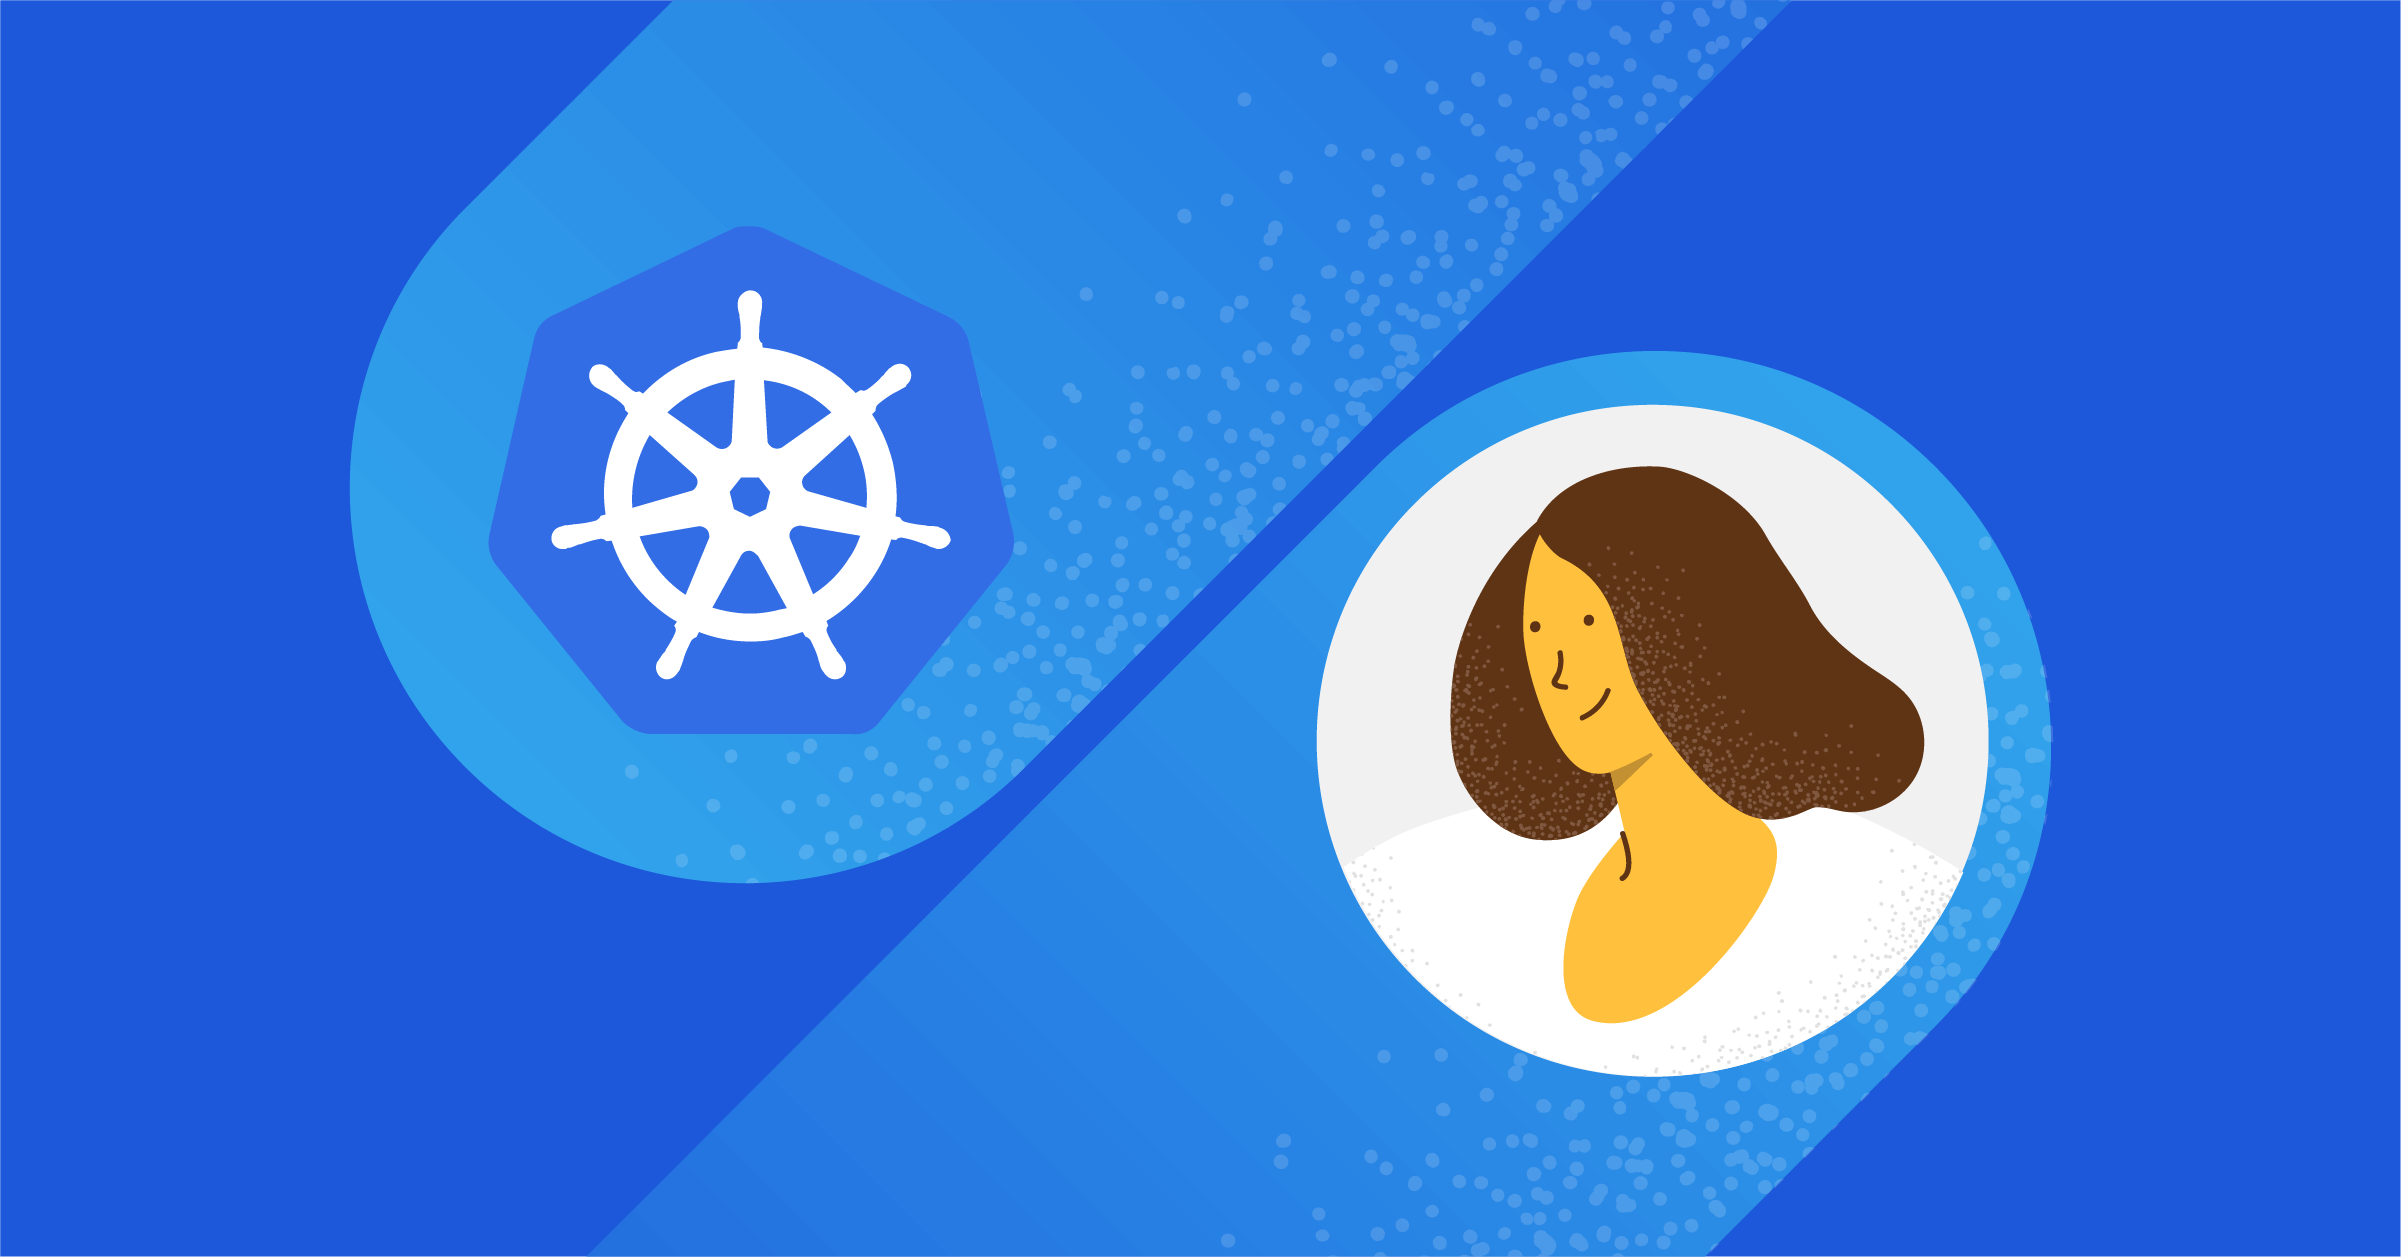 Why Mattermost built a Kubernetes Operator